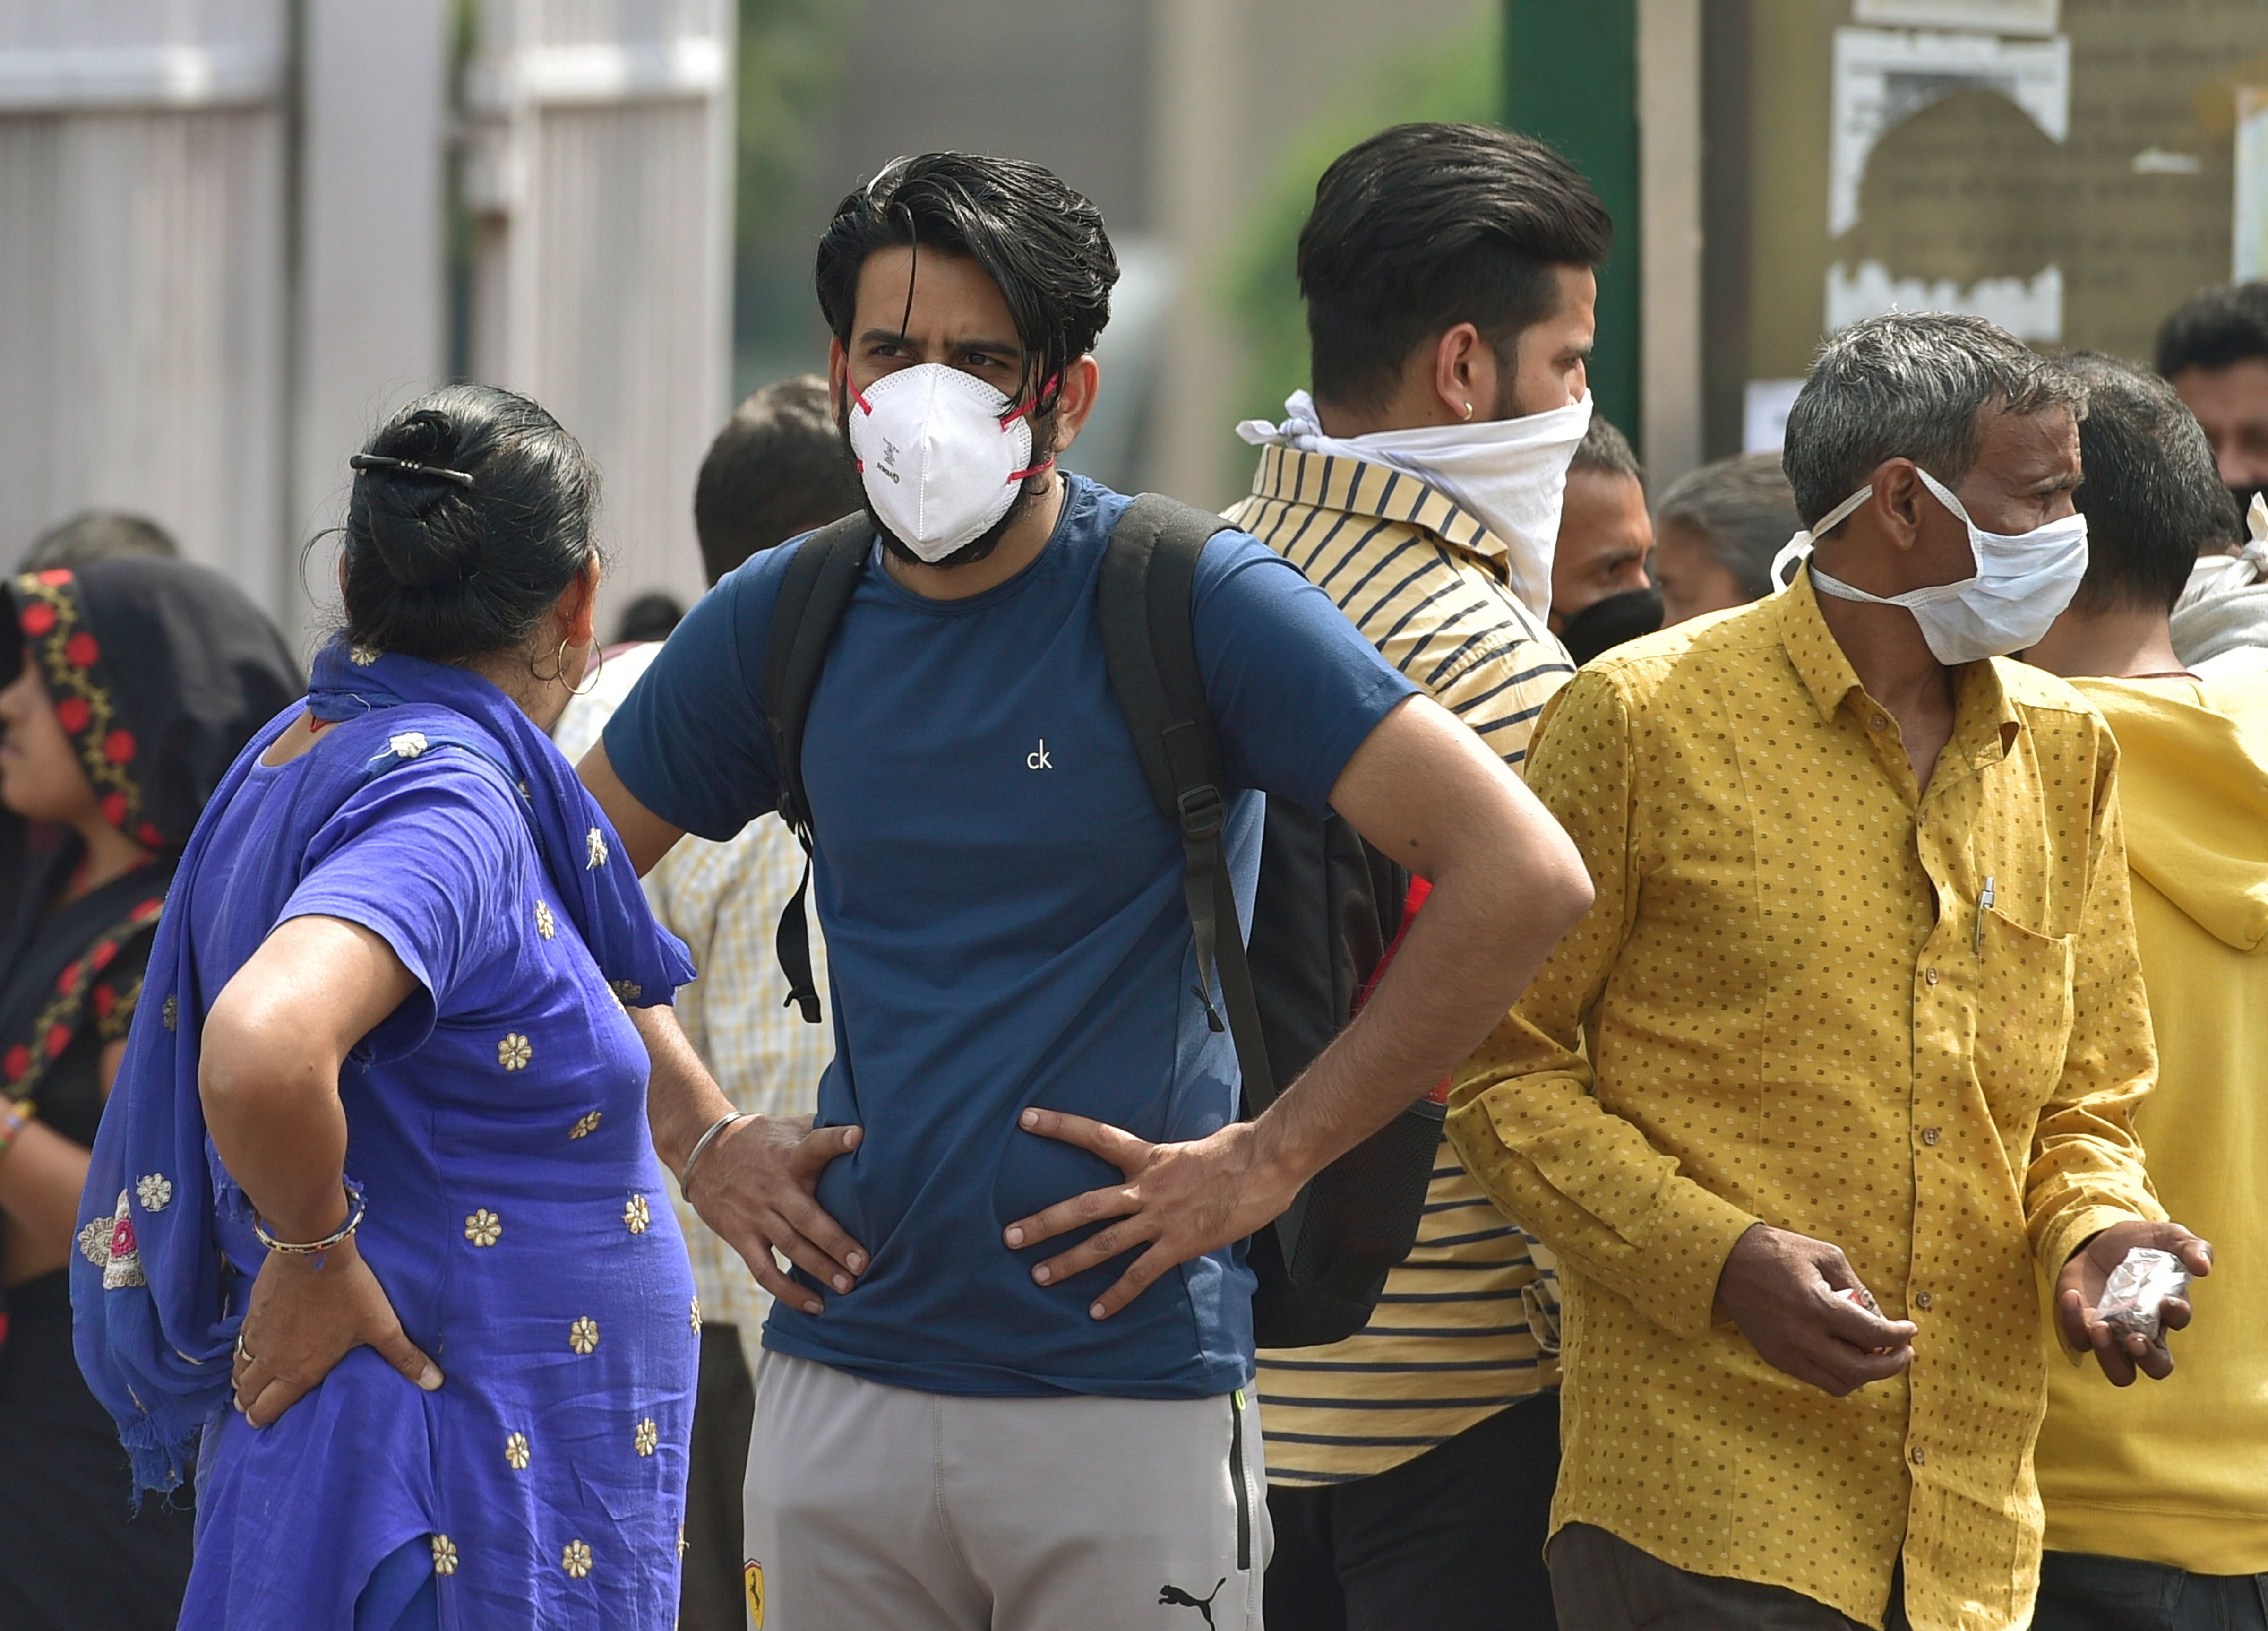 On Friday, the AIIMS had issued a circular postponing all nonessential elective procedures and surgeries and directed for only emergency life-saving surgeries with effect from March 21. (Credit: PTI Photo)